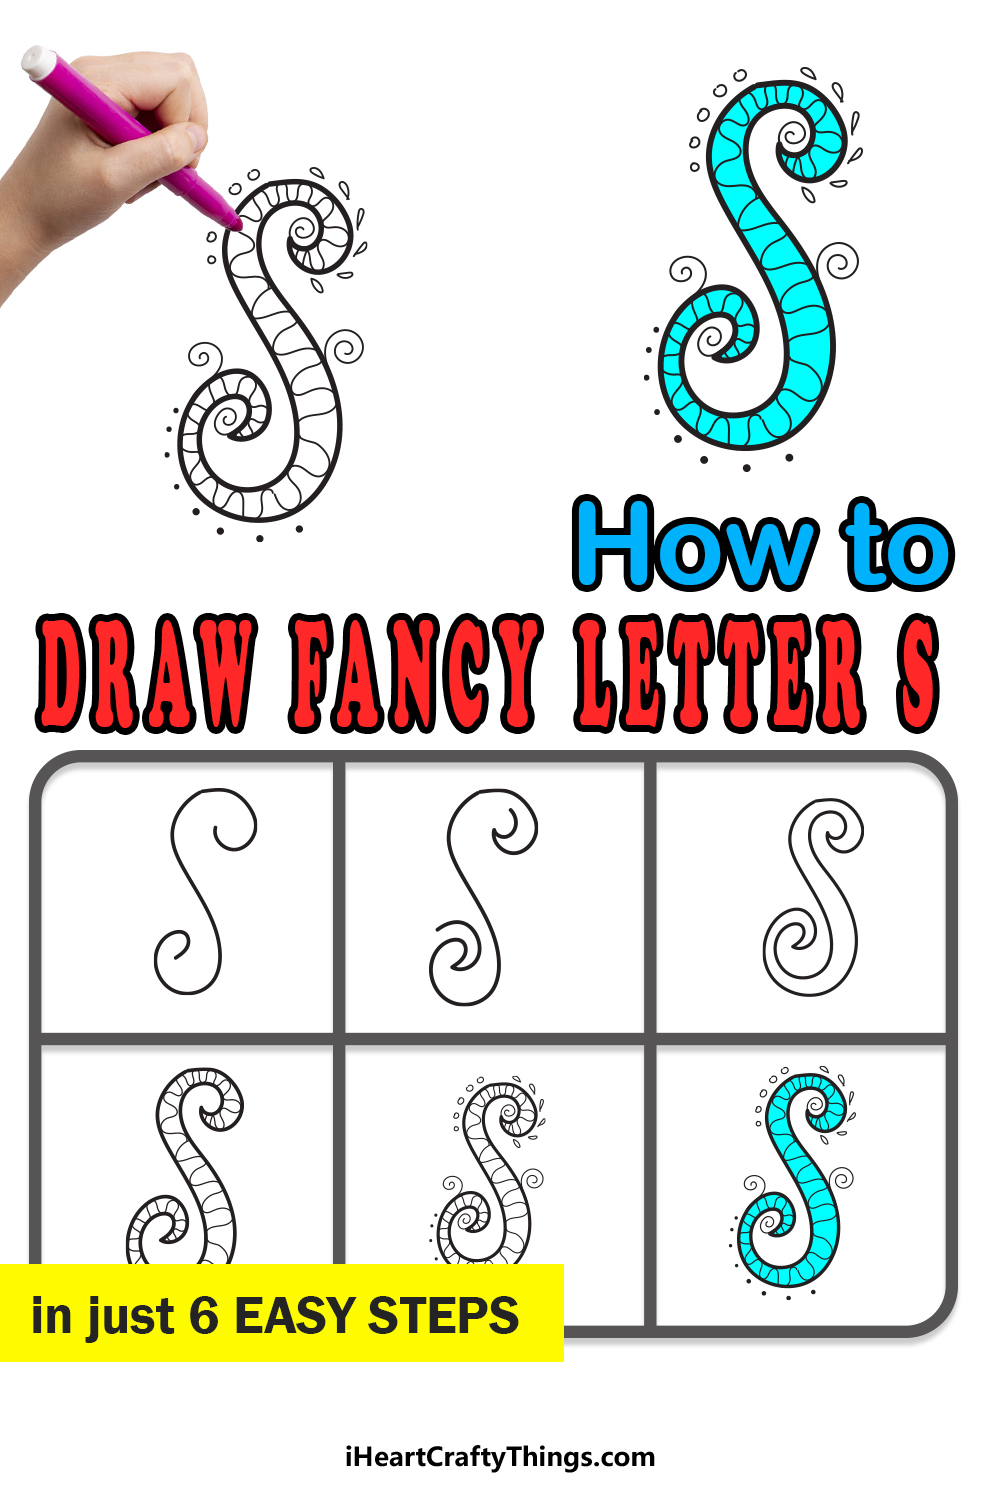 How To Draw Your Own Fancy S step by step guide